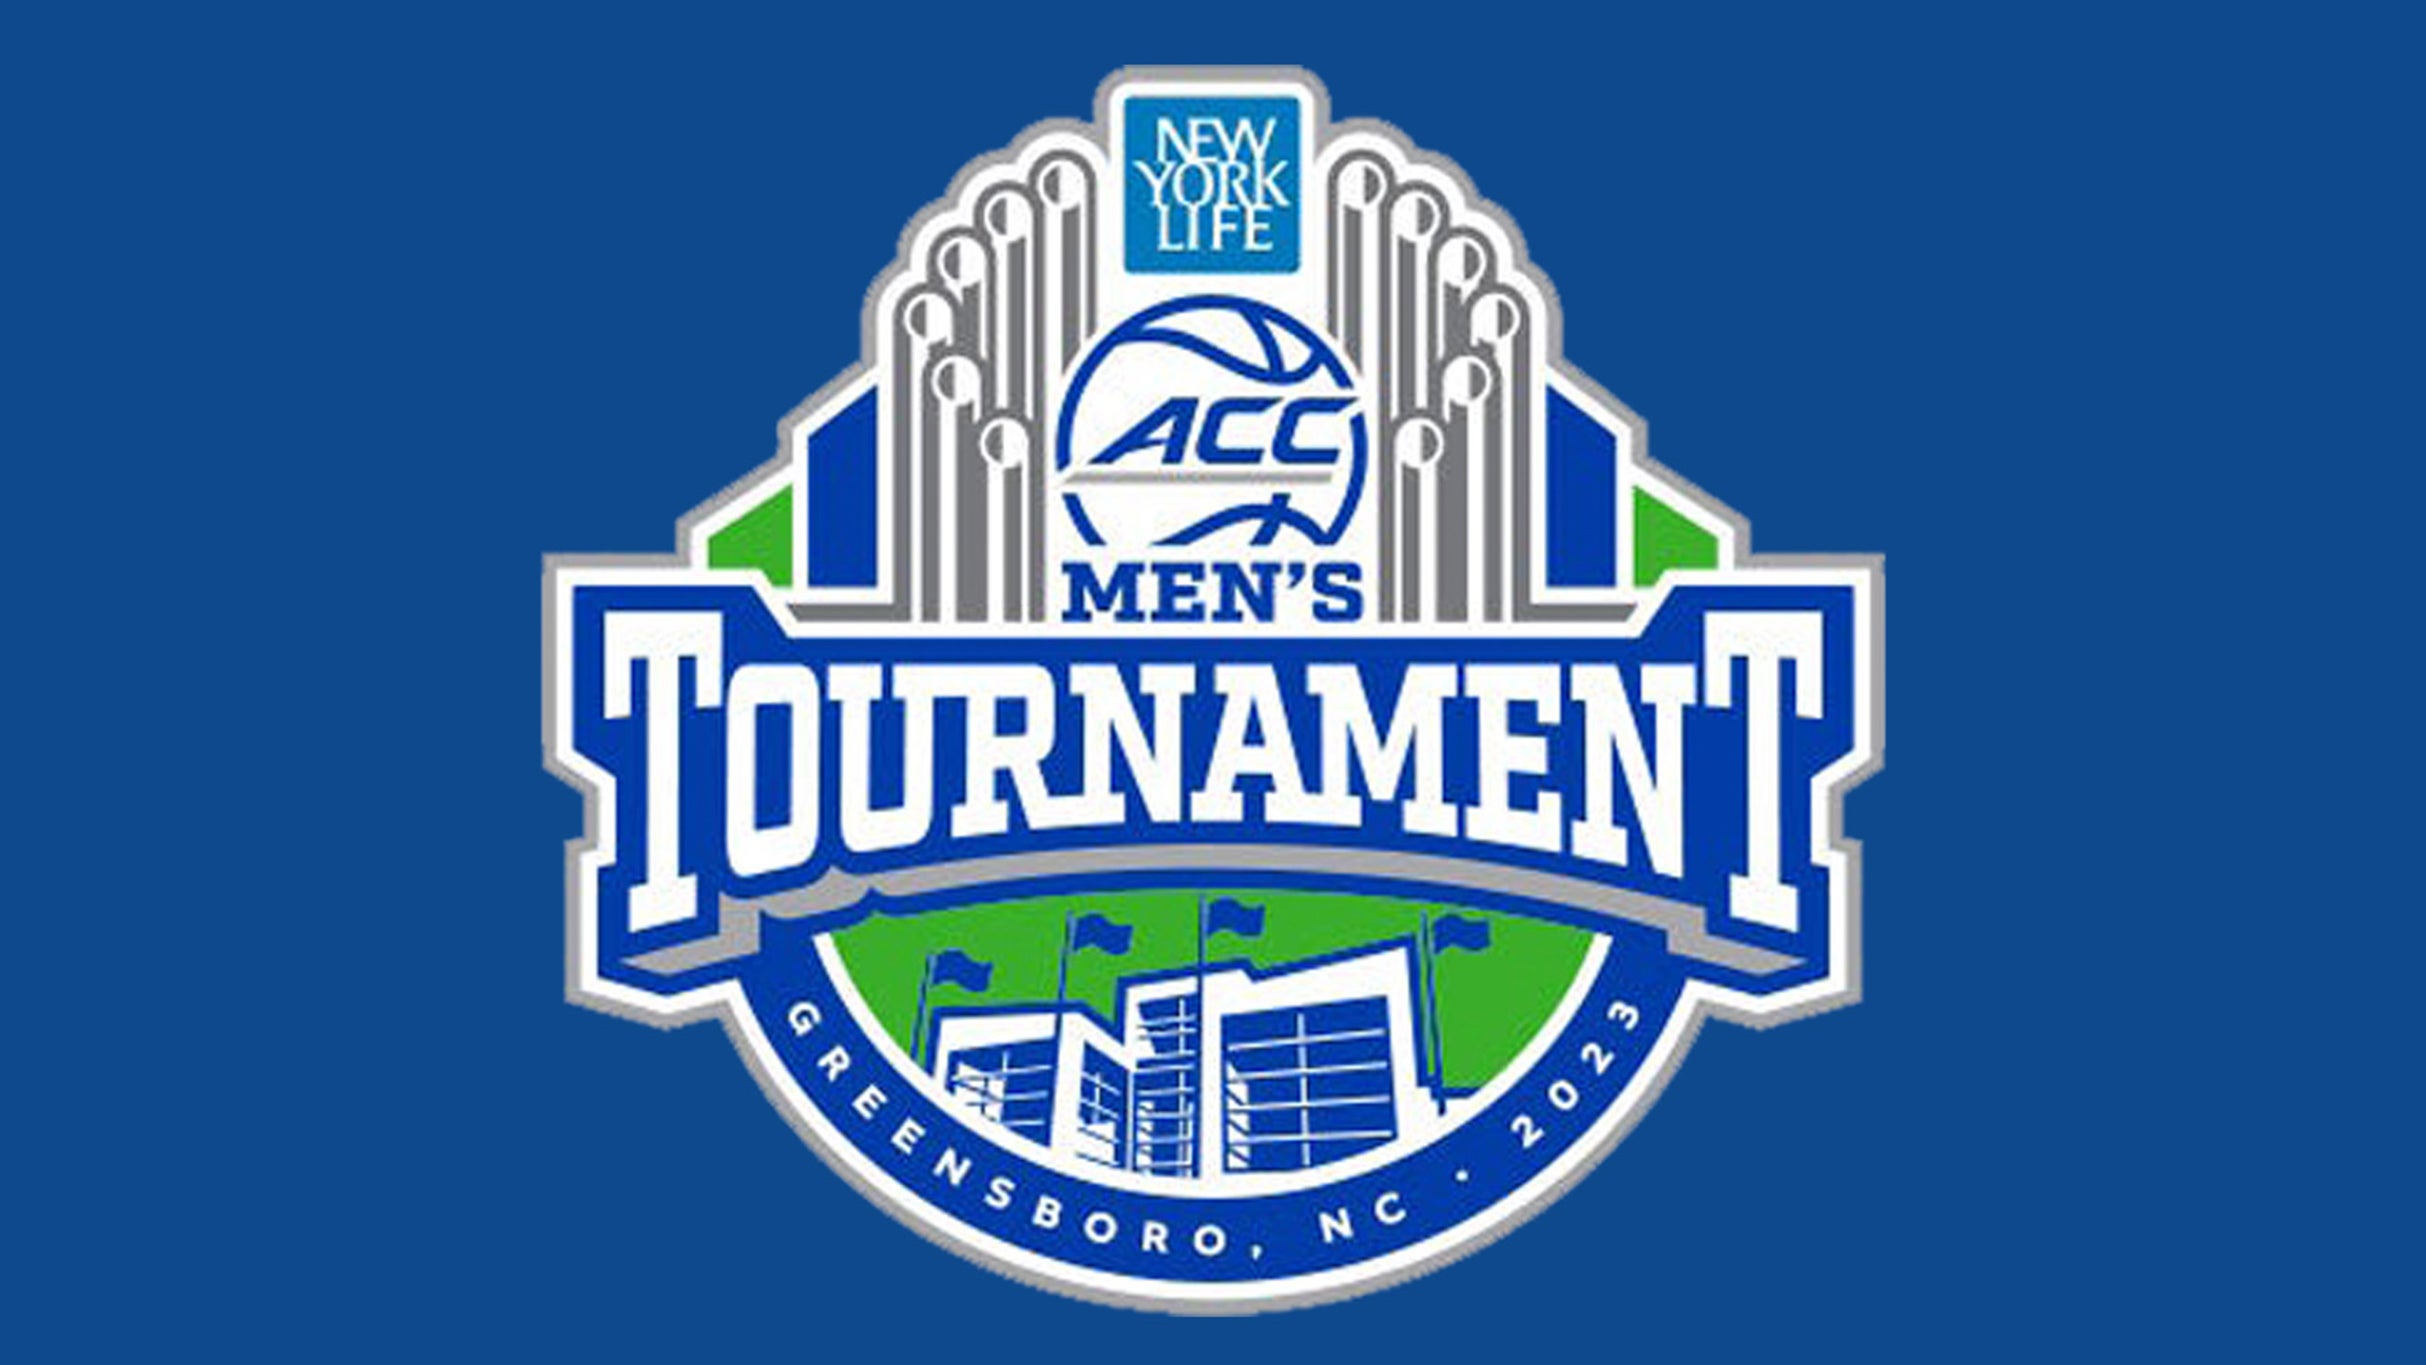 2023-new-york-life-acc-men-s-basketball-tournament-session-4-2023-presale-code-official